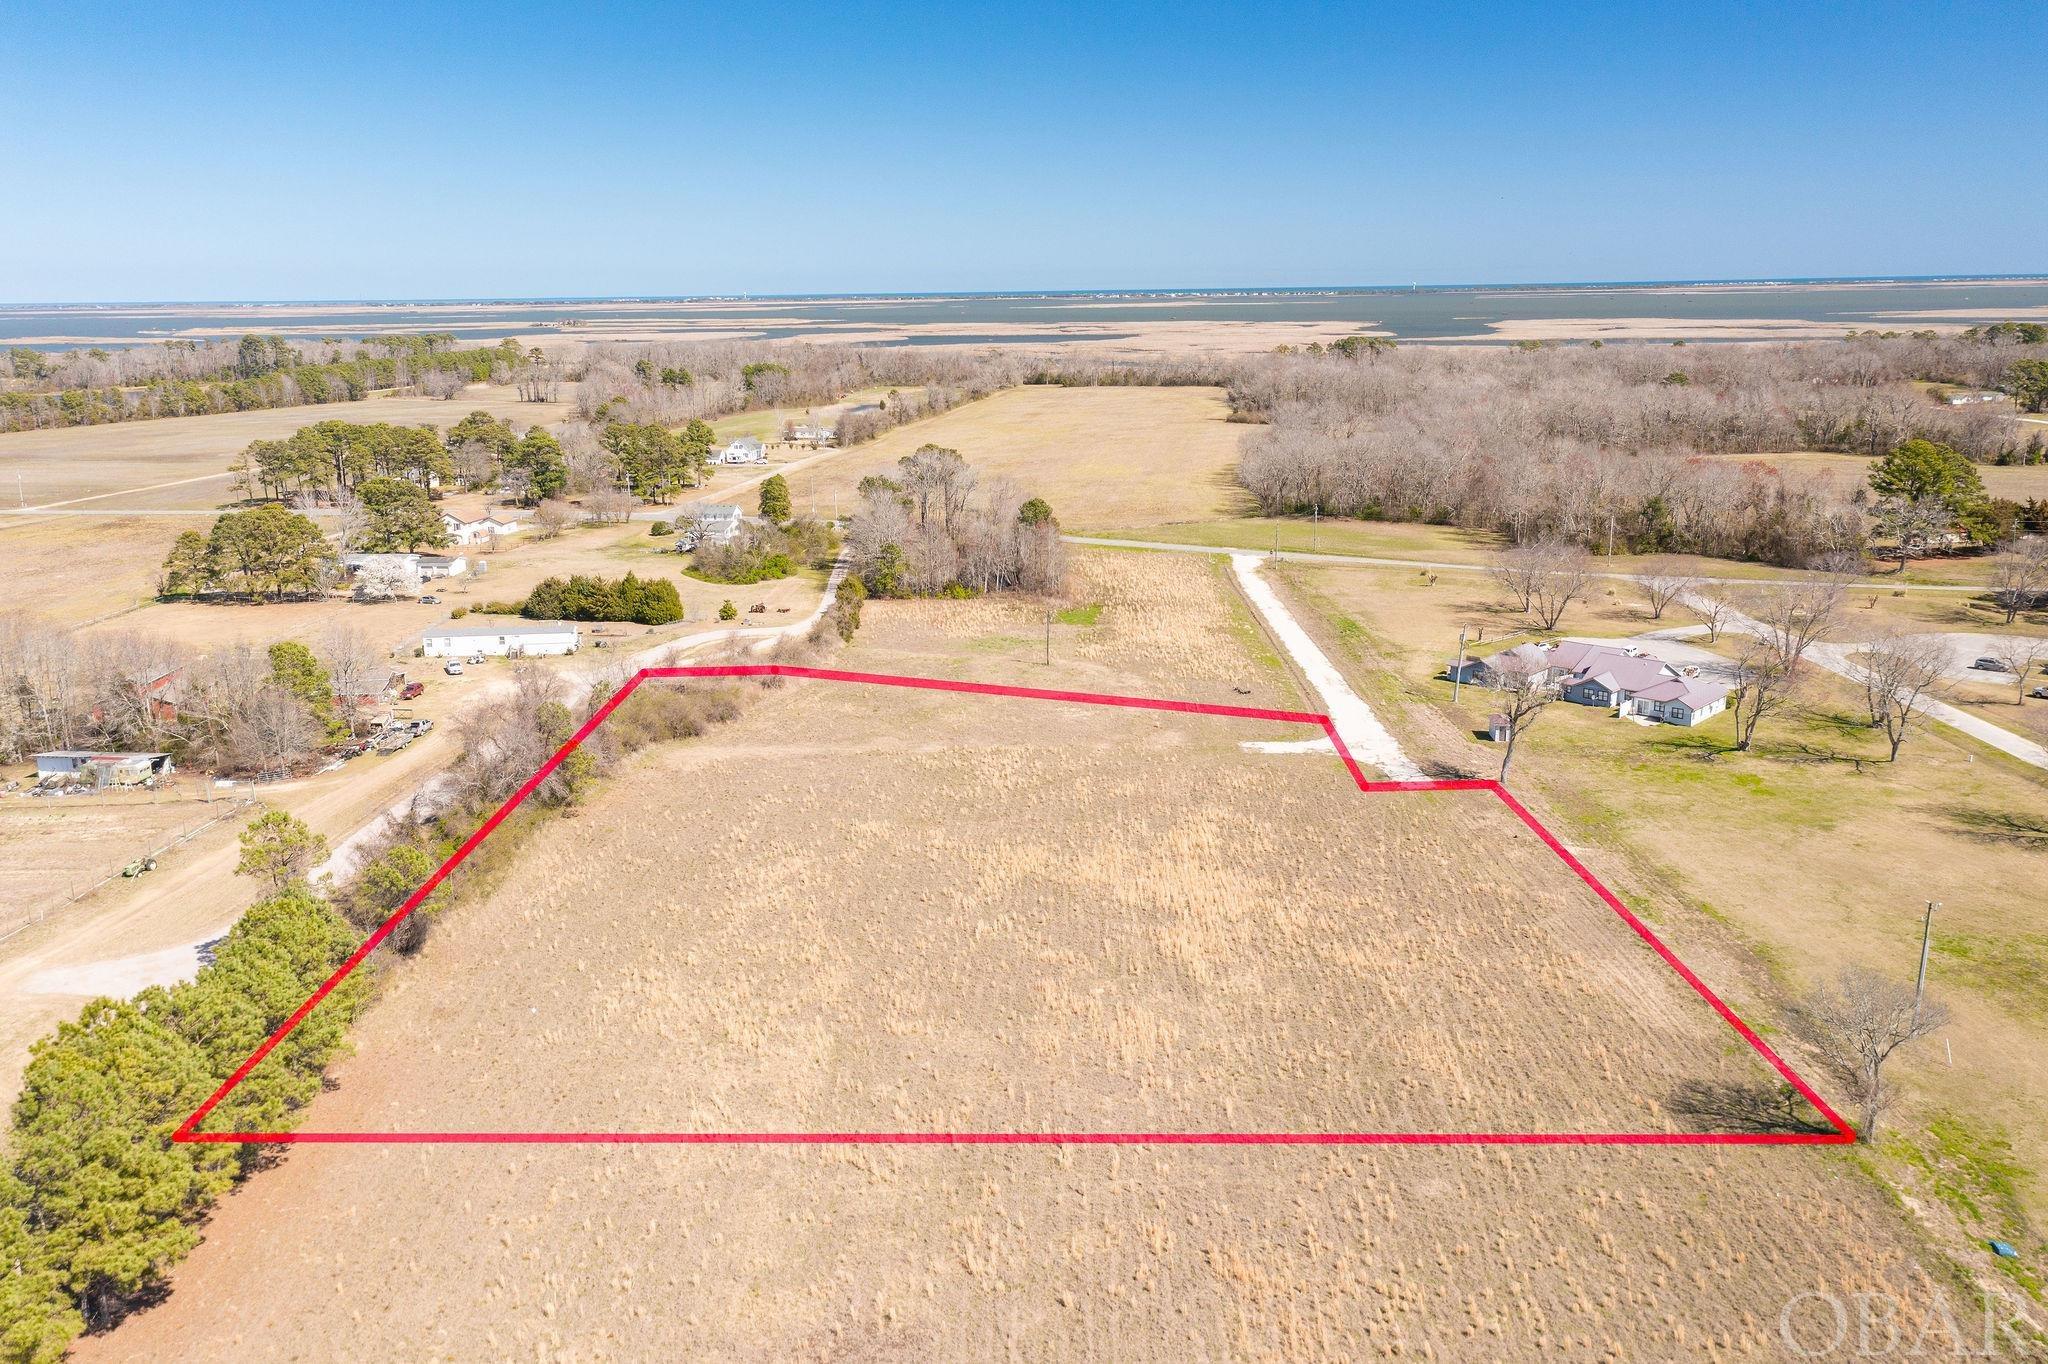 4 Acres, cleared in Lower Currituck. Looking for a spot to lay a few roots down and let them grow? Look no further. With four (4) acres to spread out, this space has so many possibilities. With no HOA and no HOA fees (or HOA restrictions), you have the freedom to make this property your own private oasis. Centrally located within Currituck yet just a very short drive to the Outer Banks. Grocery shopping is located within miles but you can still enjoy a slower paced lifestyle on the backroads.